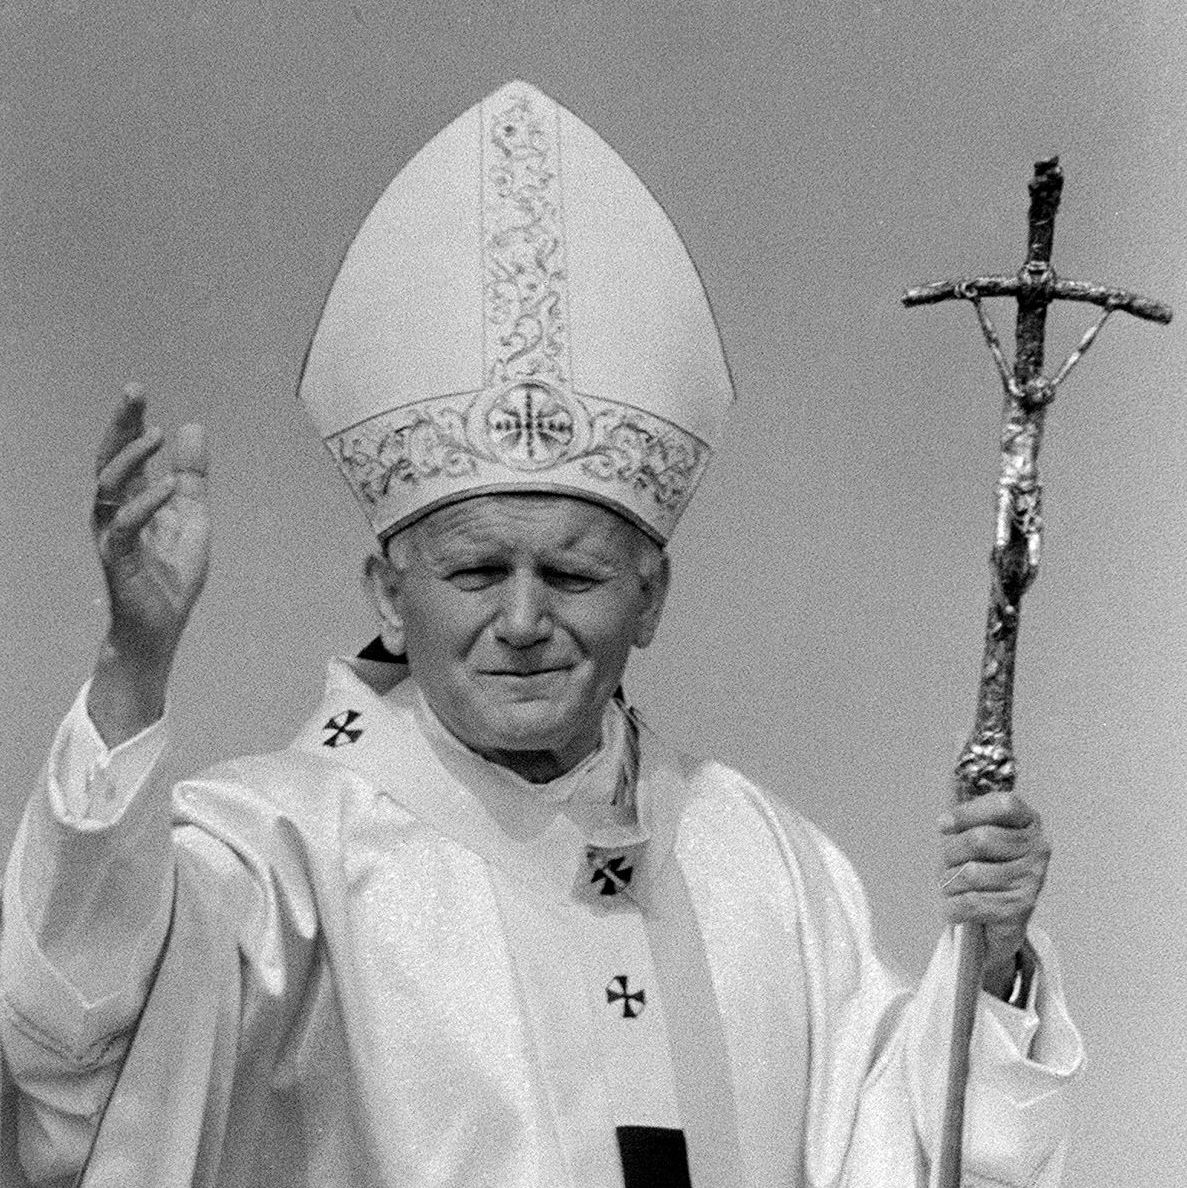 “If you want equal justice for all, and true freedom and lasting peace, then, America, defend life!” St. John Paul II